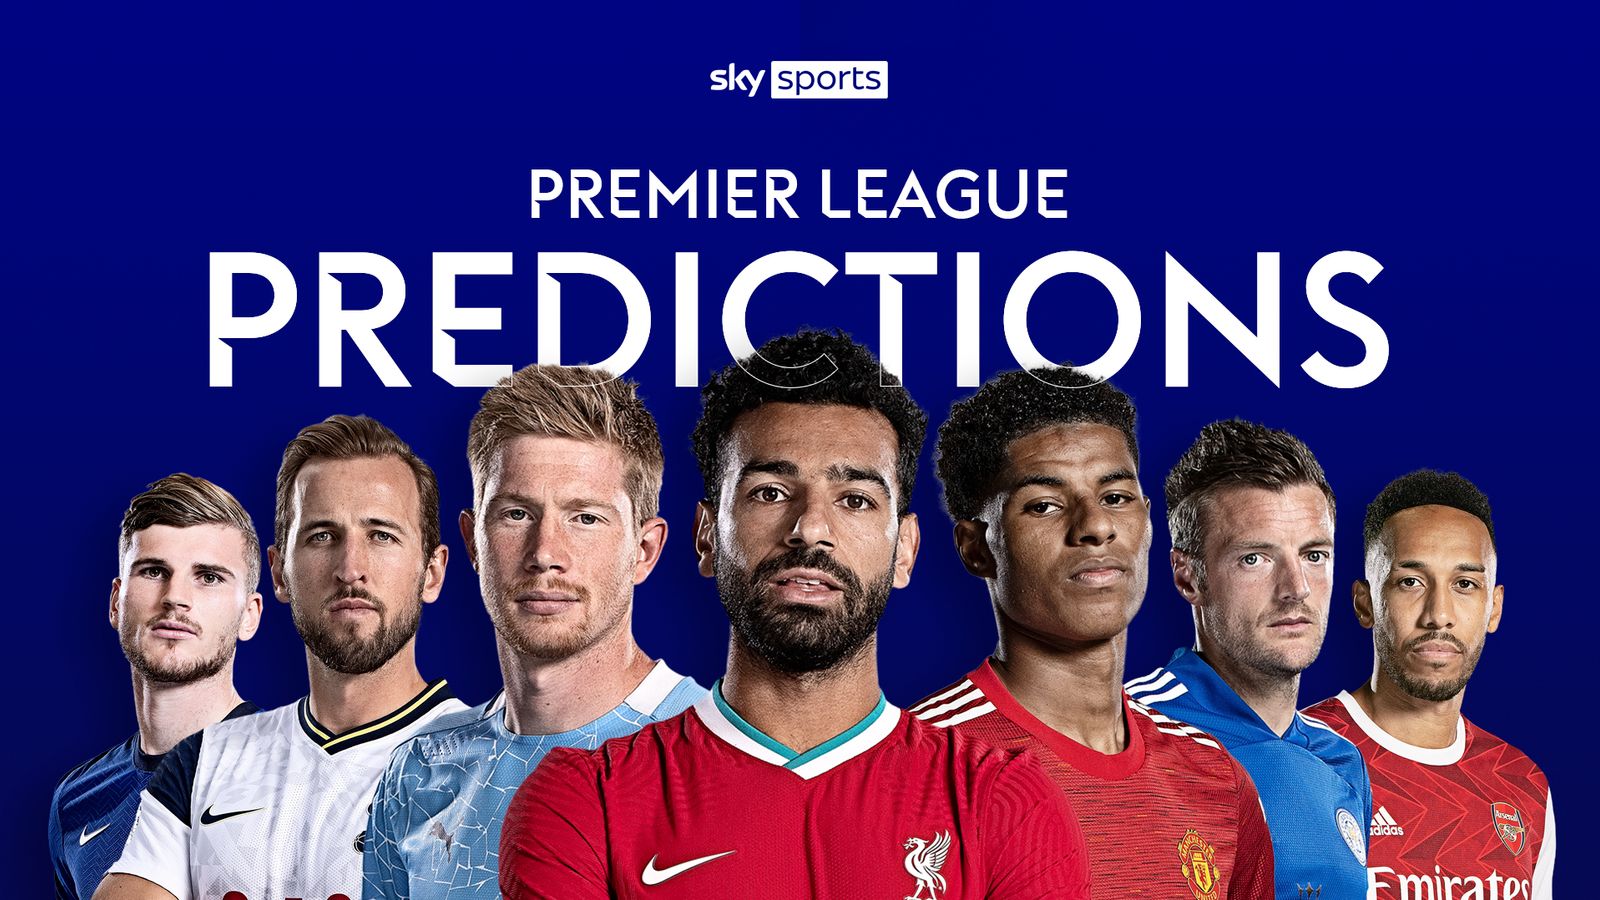 I've created a Premier League predictions (win/lose/draw) website